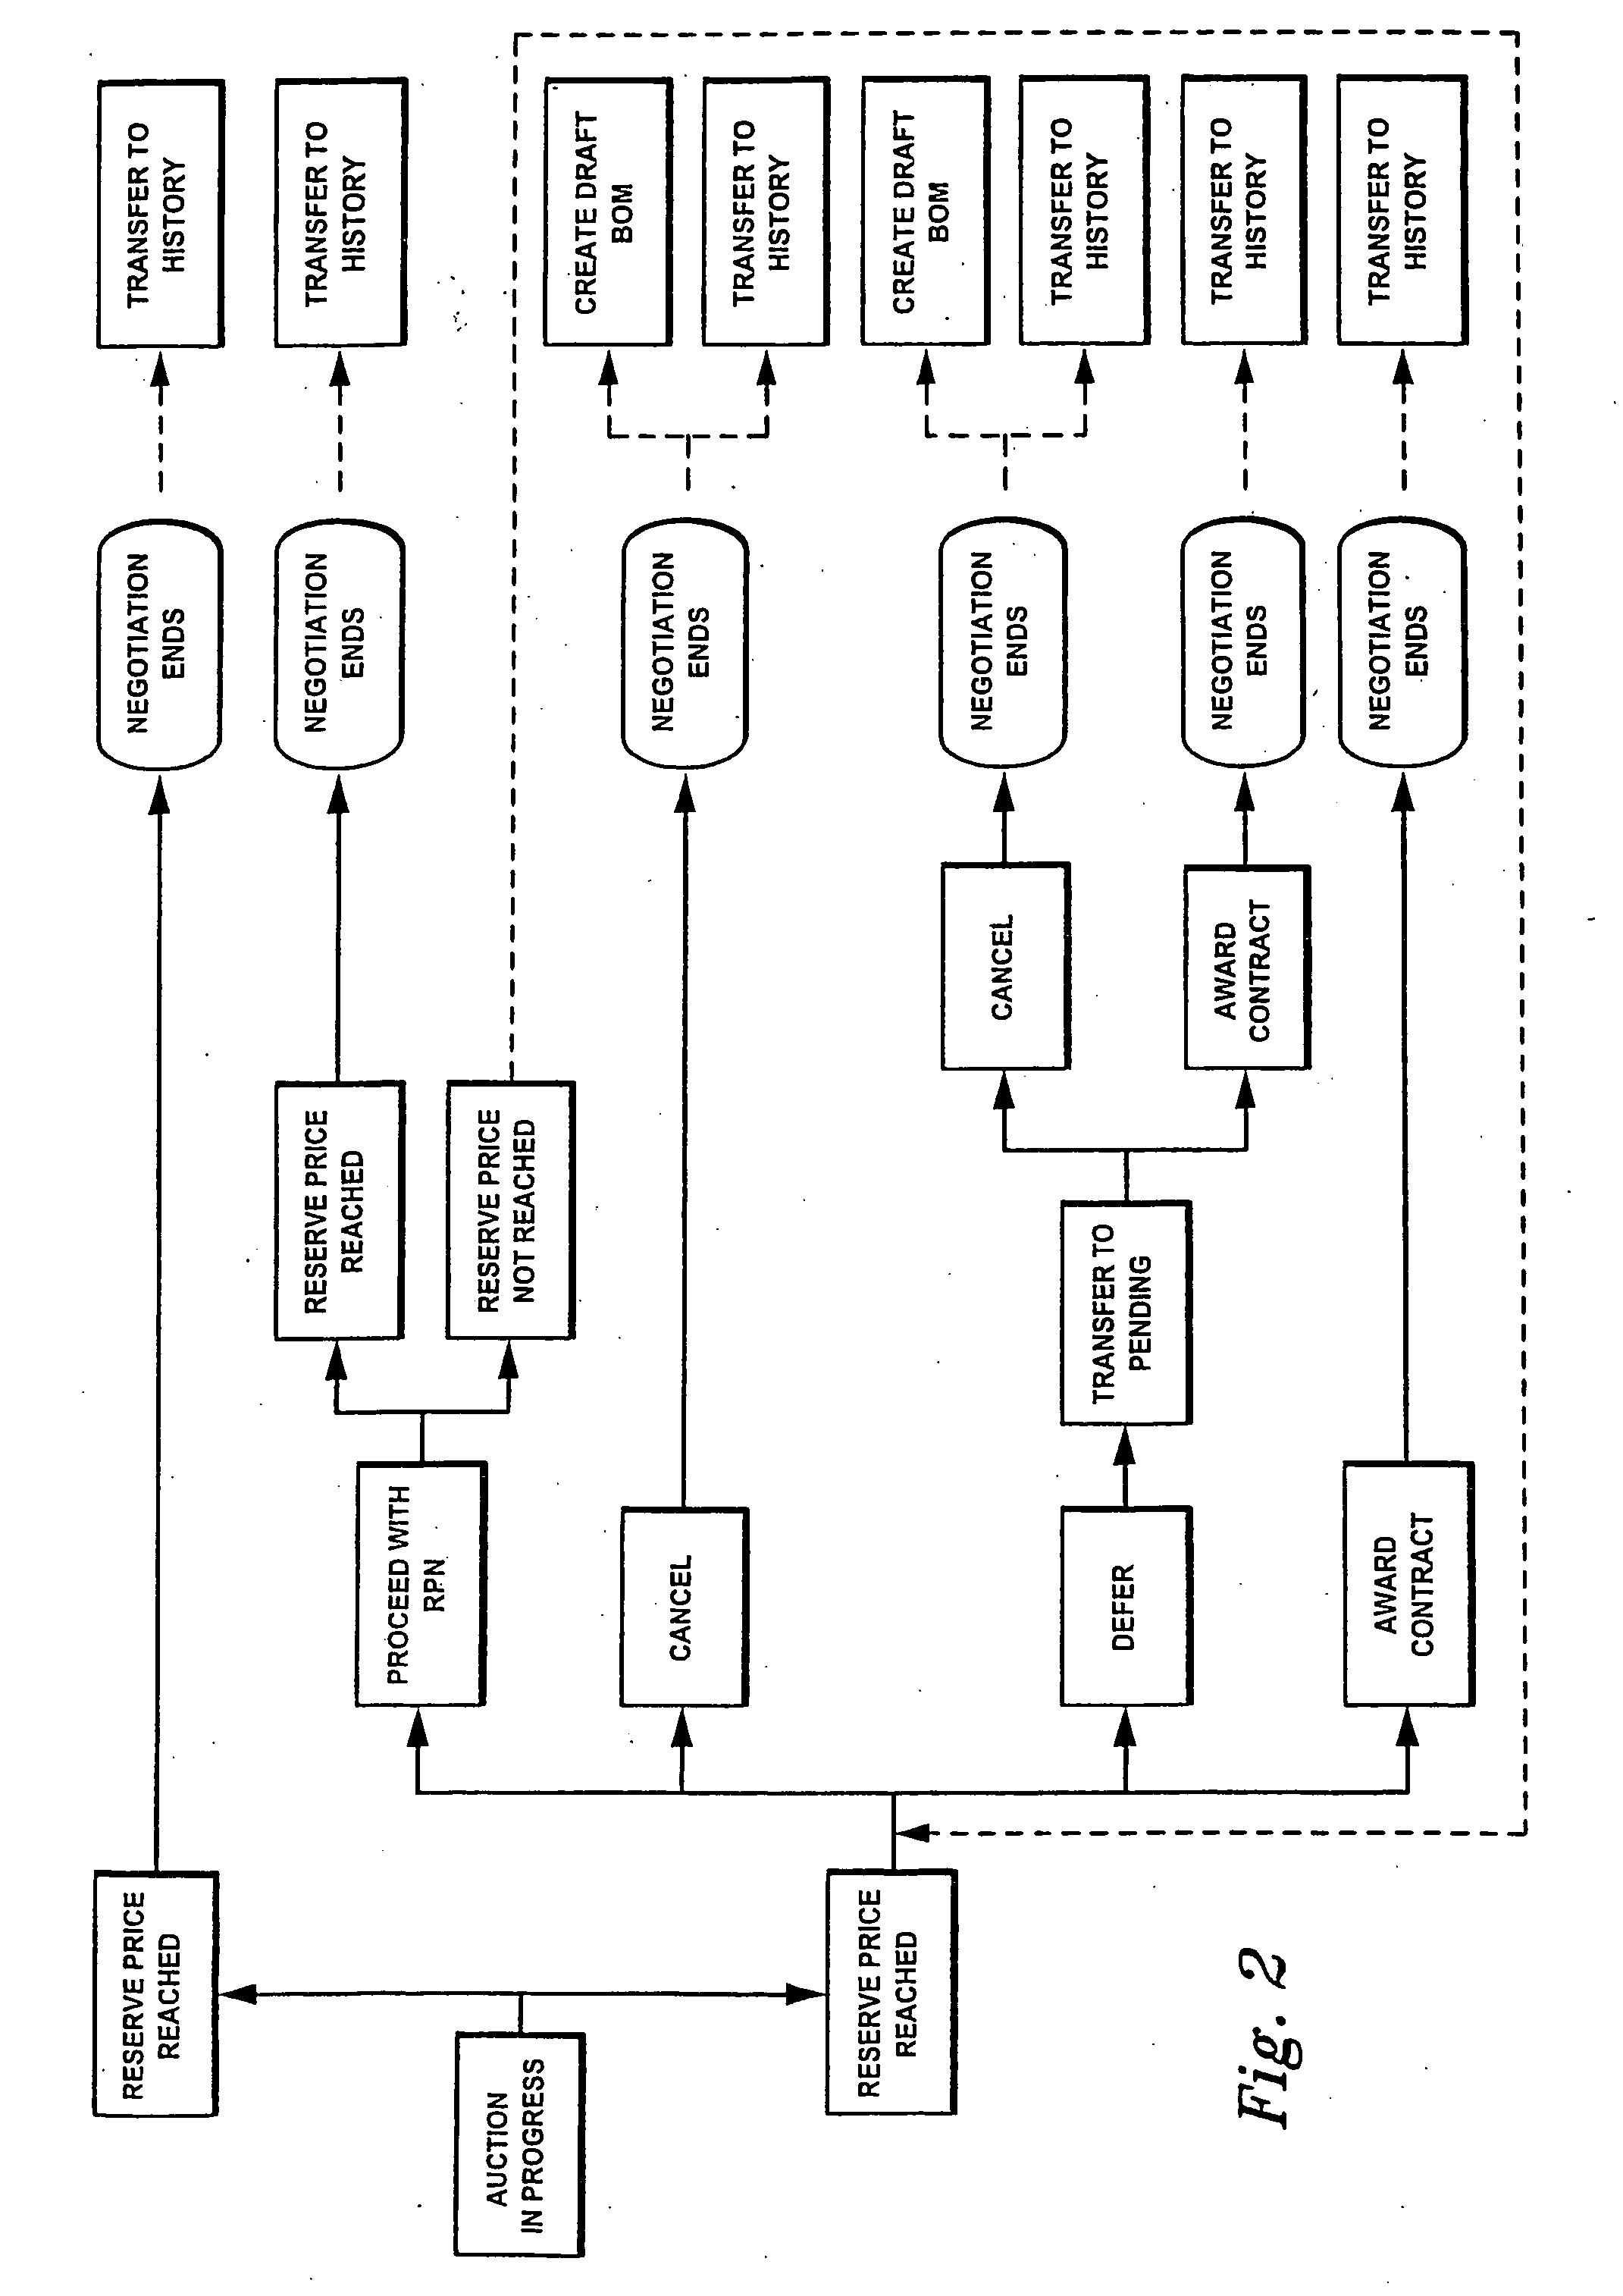 System and method for conducting online auctions